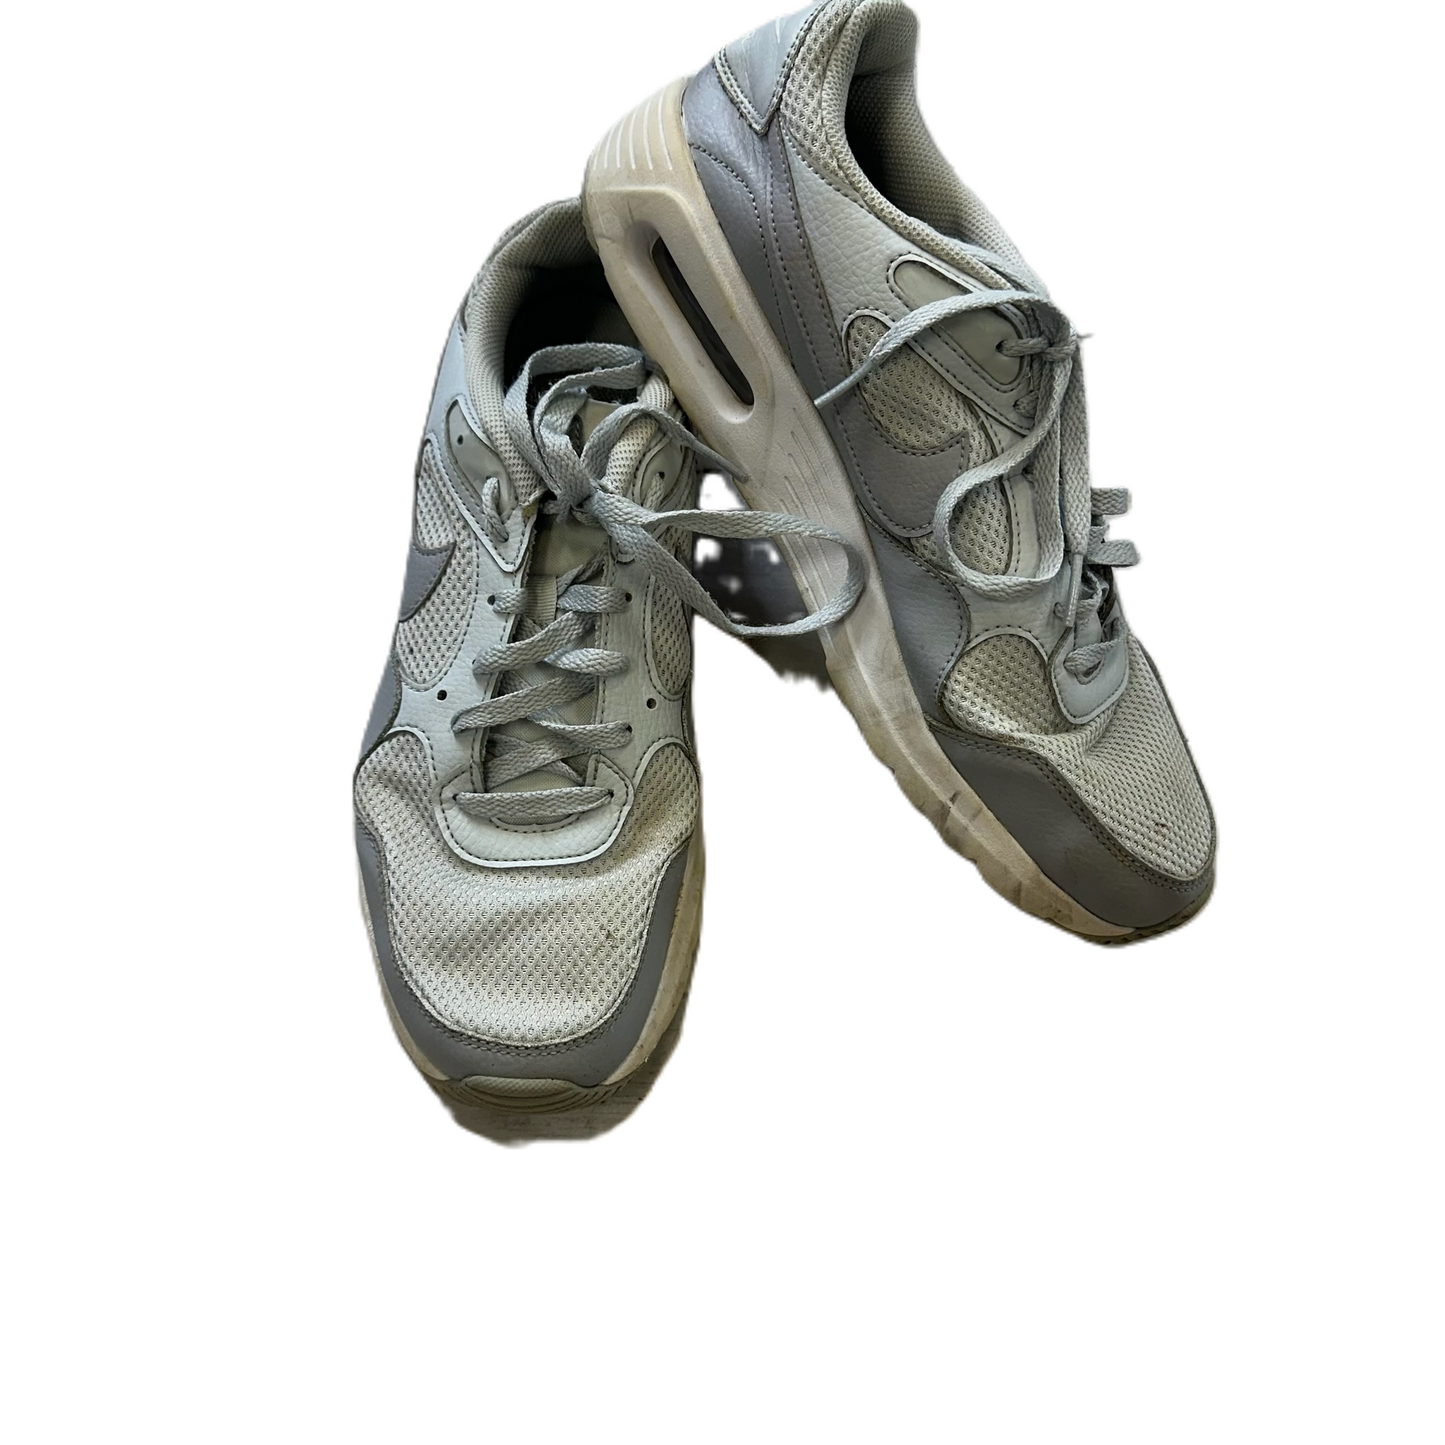 Grey Shoes Athletic By Nike, Size: 9.5